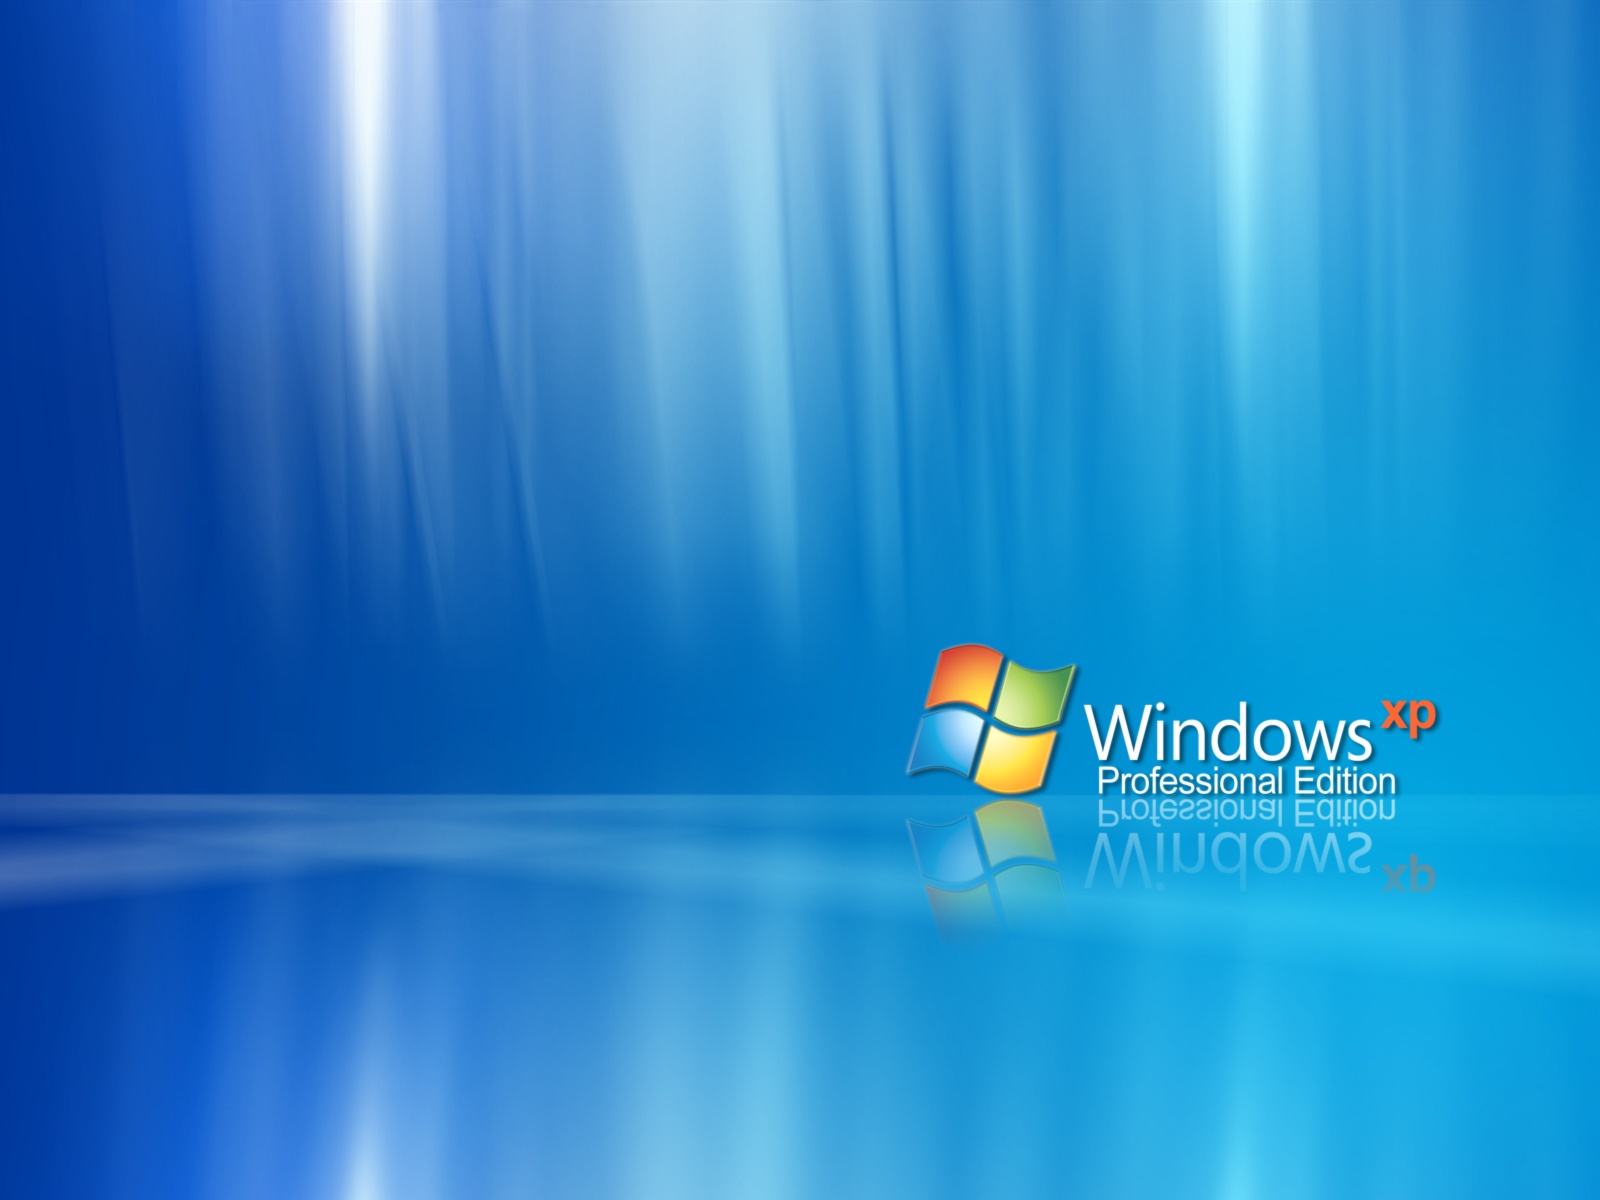 50 Cool Windows XP Wallpapers In HD For Free Download.